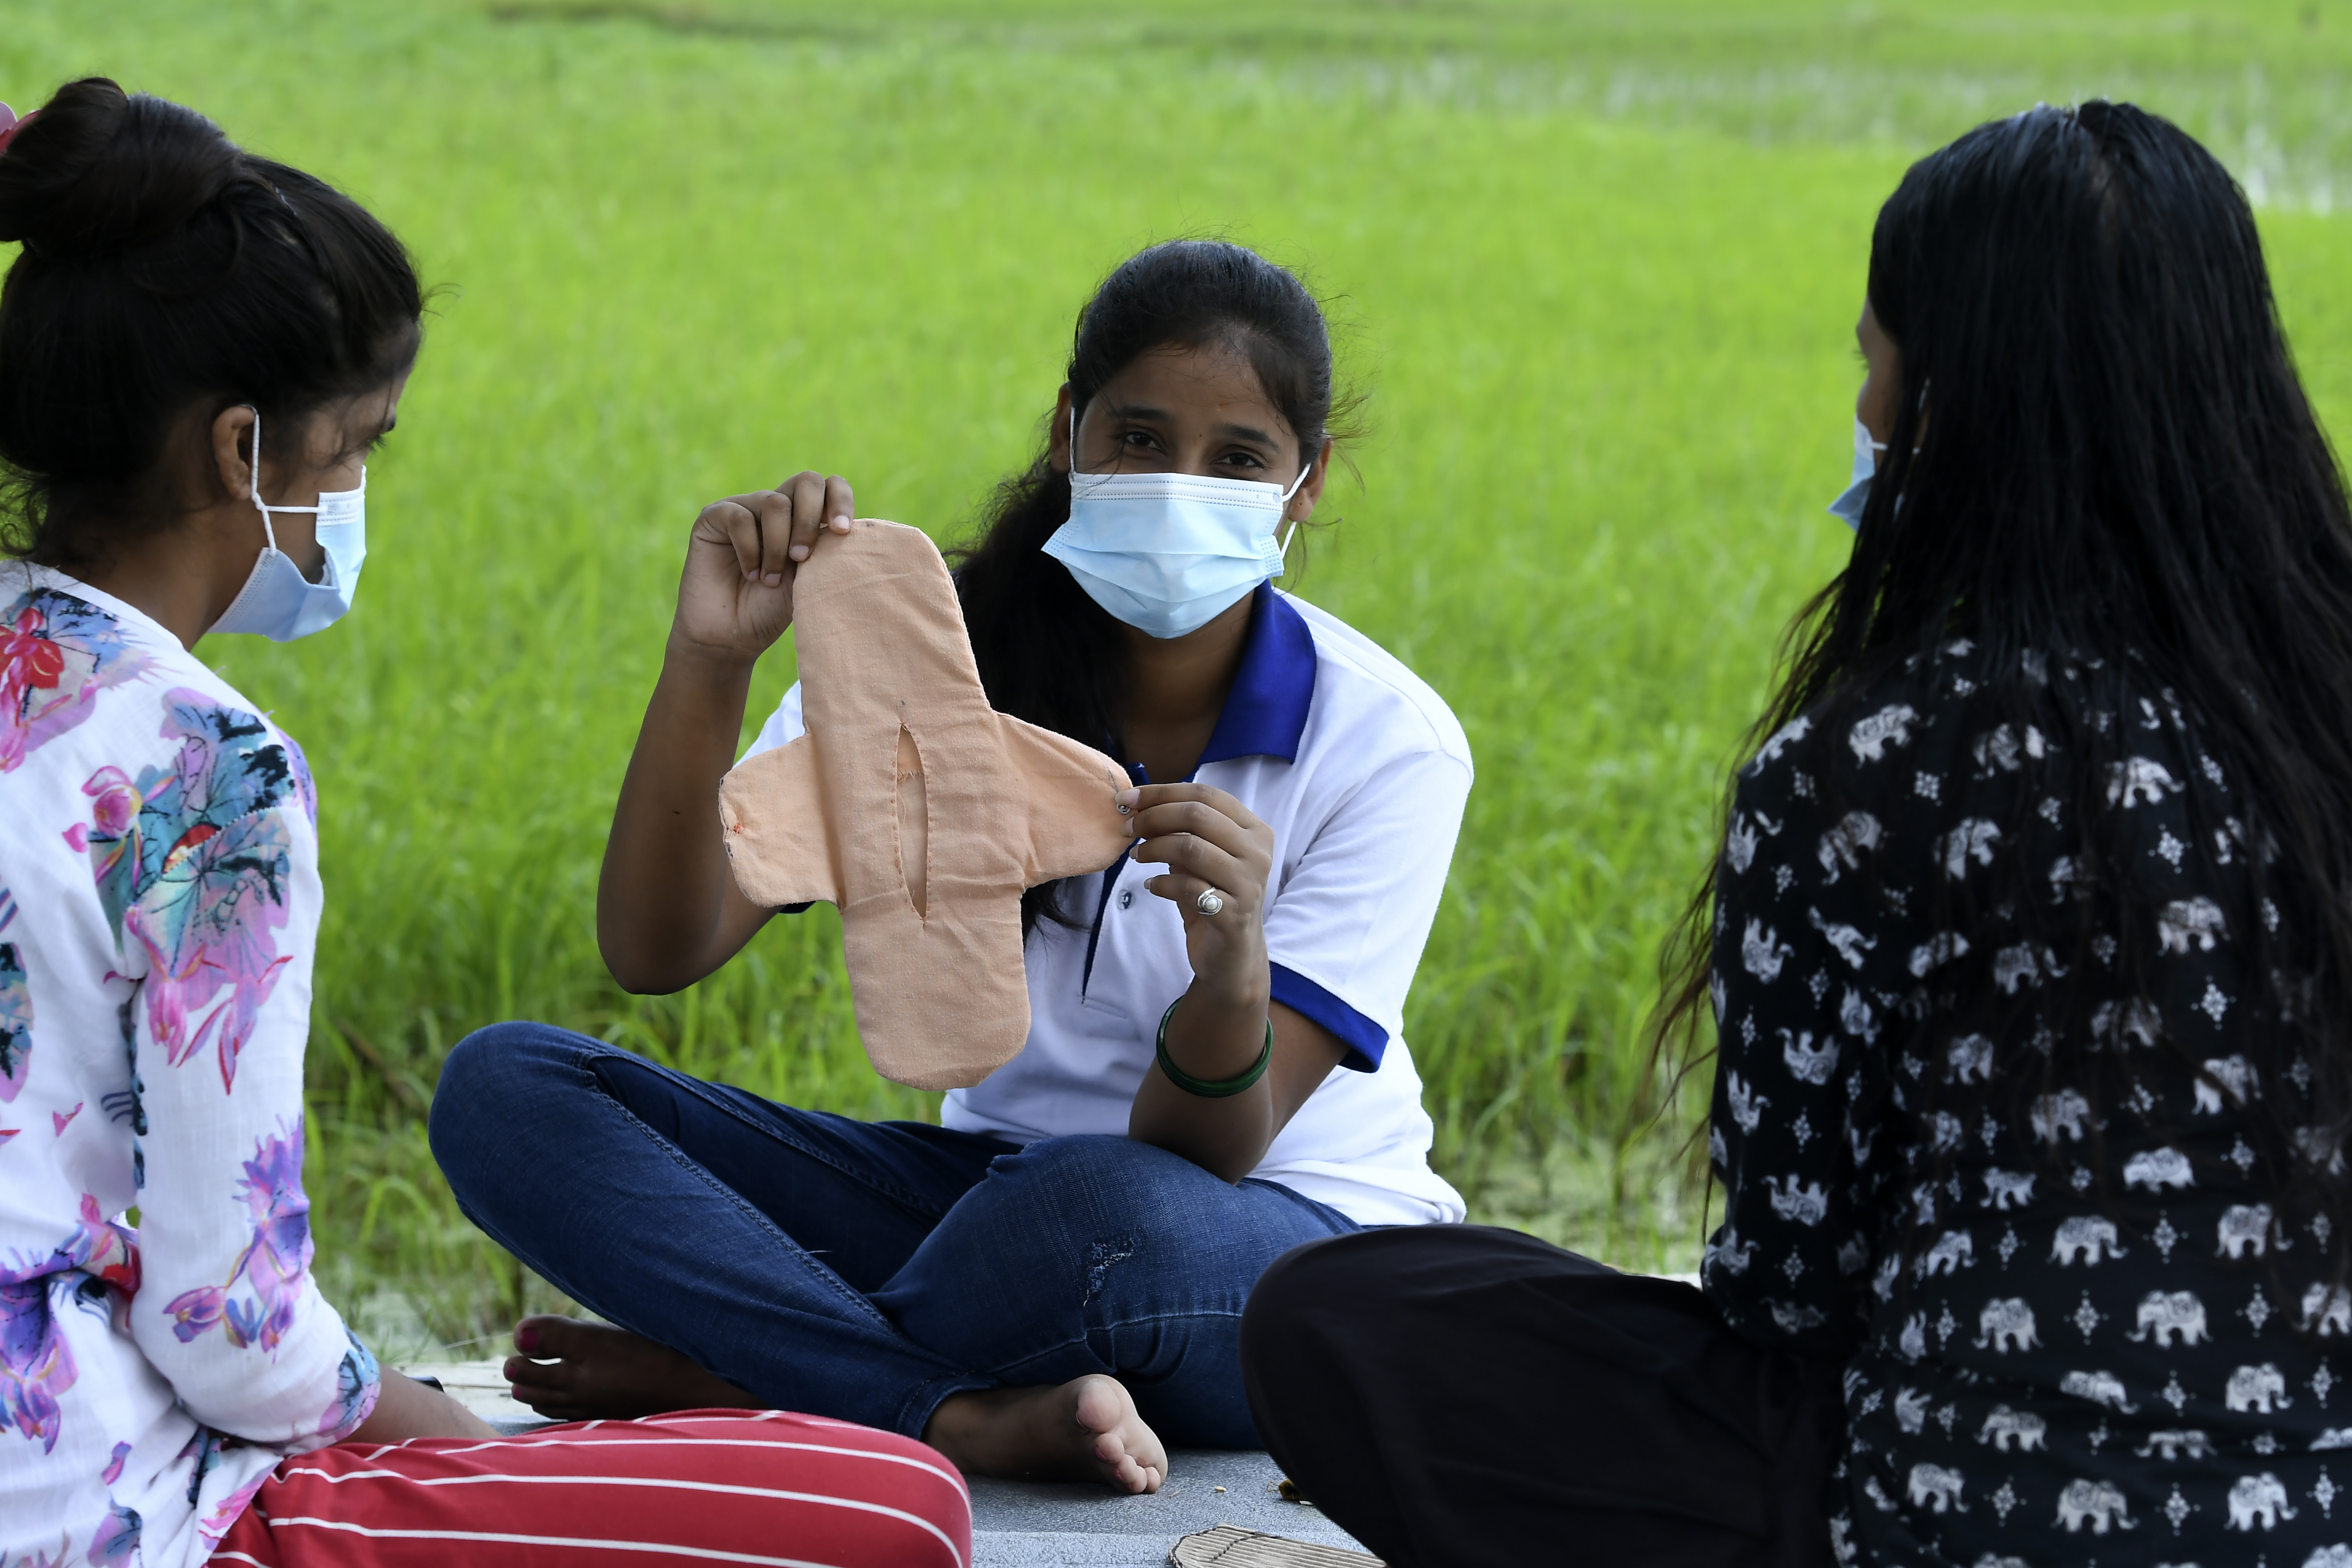 COVID-19 is Making it Even Harder for Girls in Rural Nepal to Deal With Period Stigma